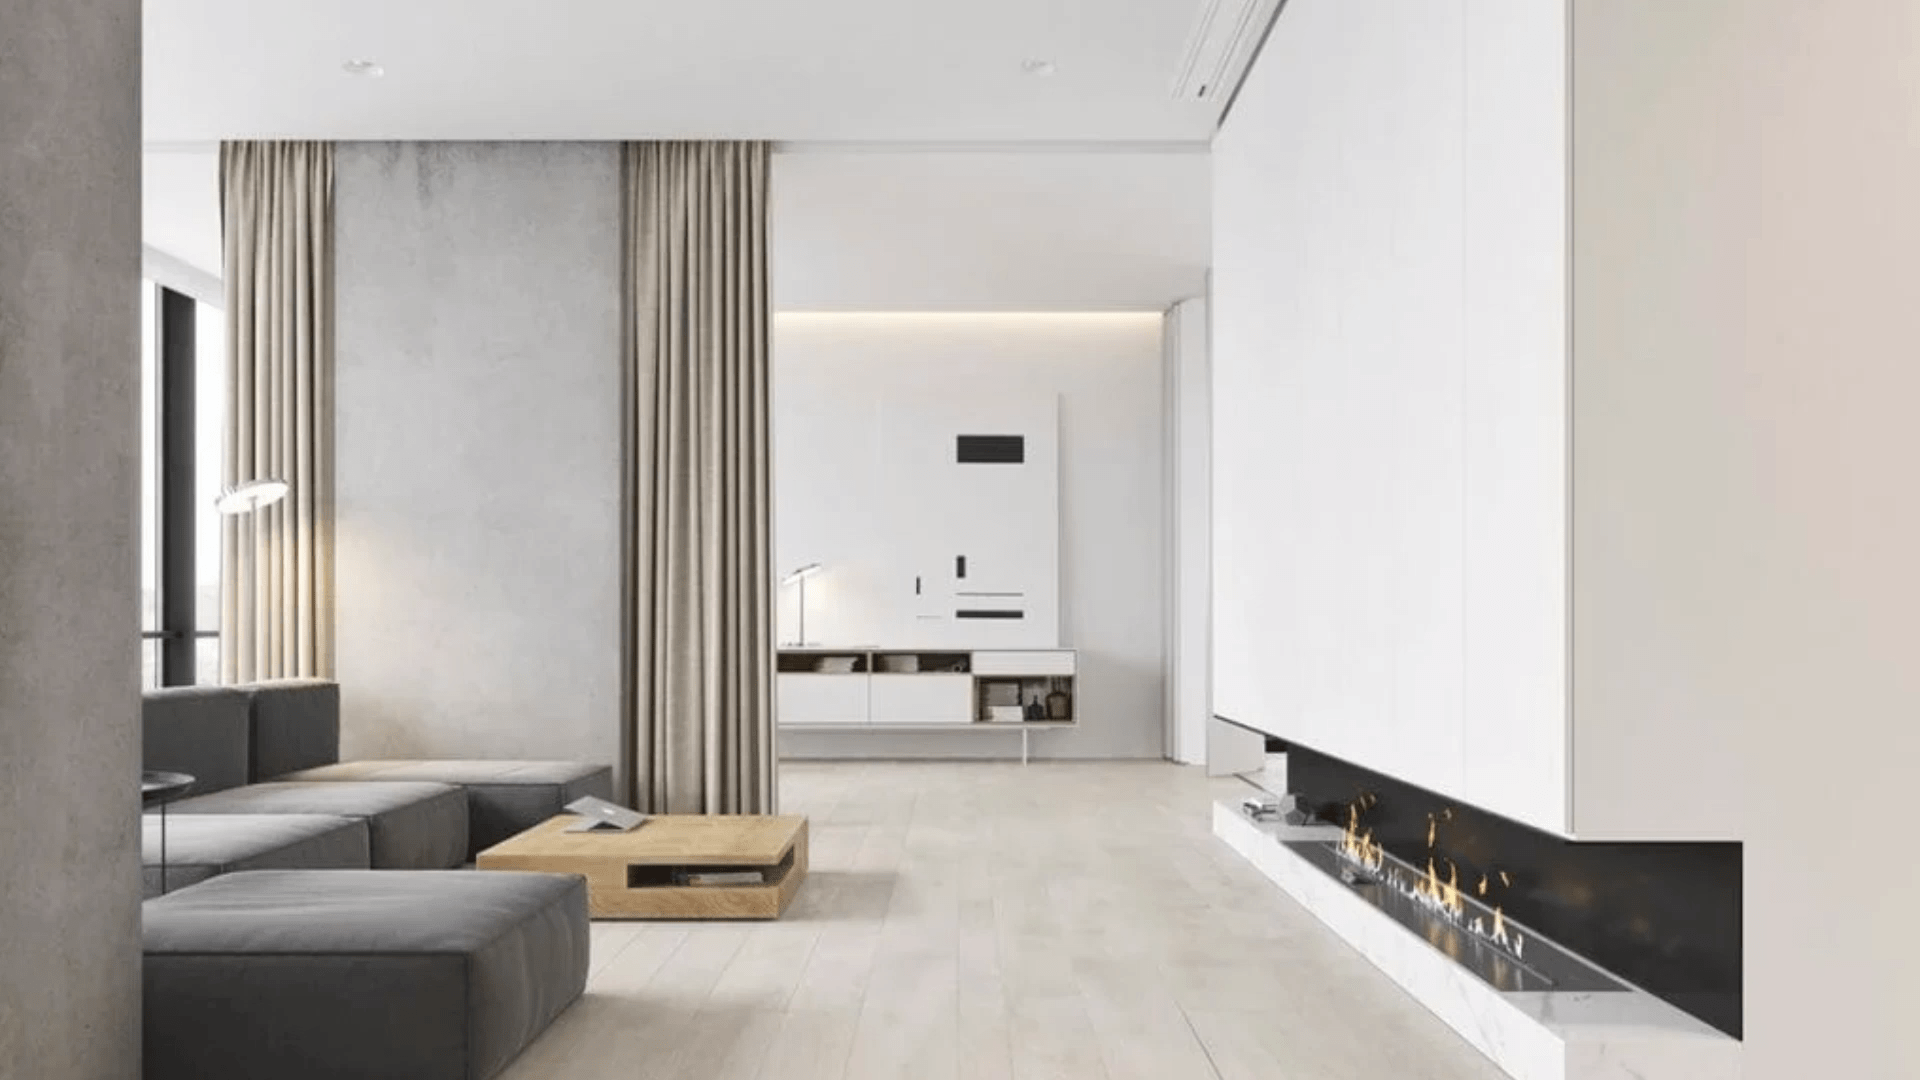 Minimalist Interior Design: 7 Best Tips for Creating a Stunning Look